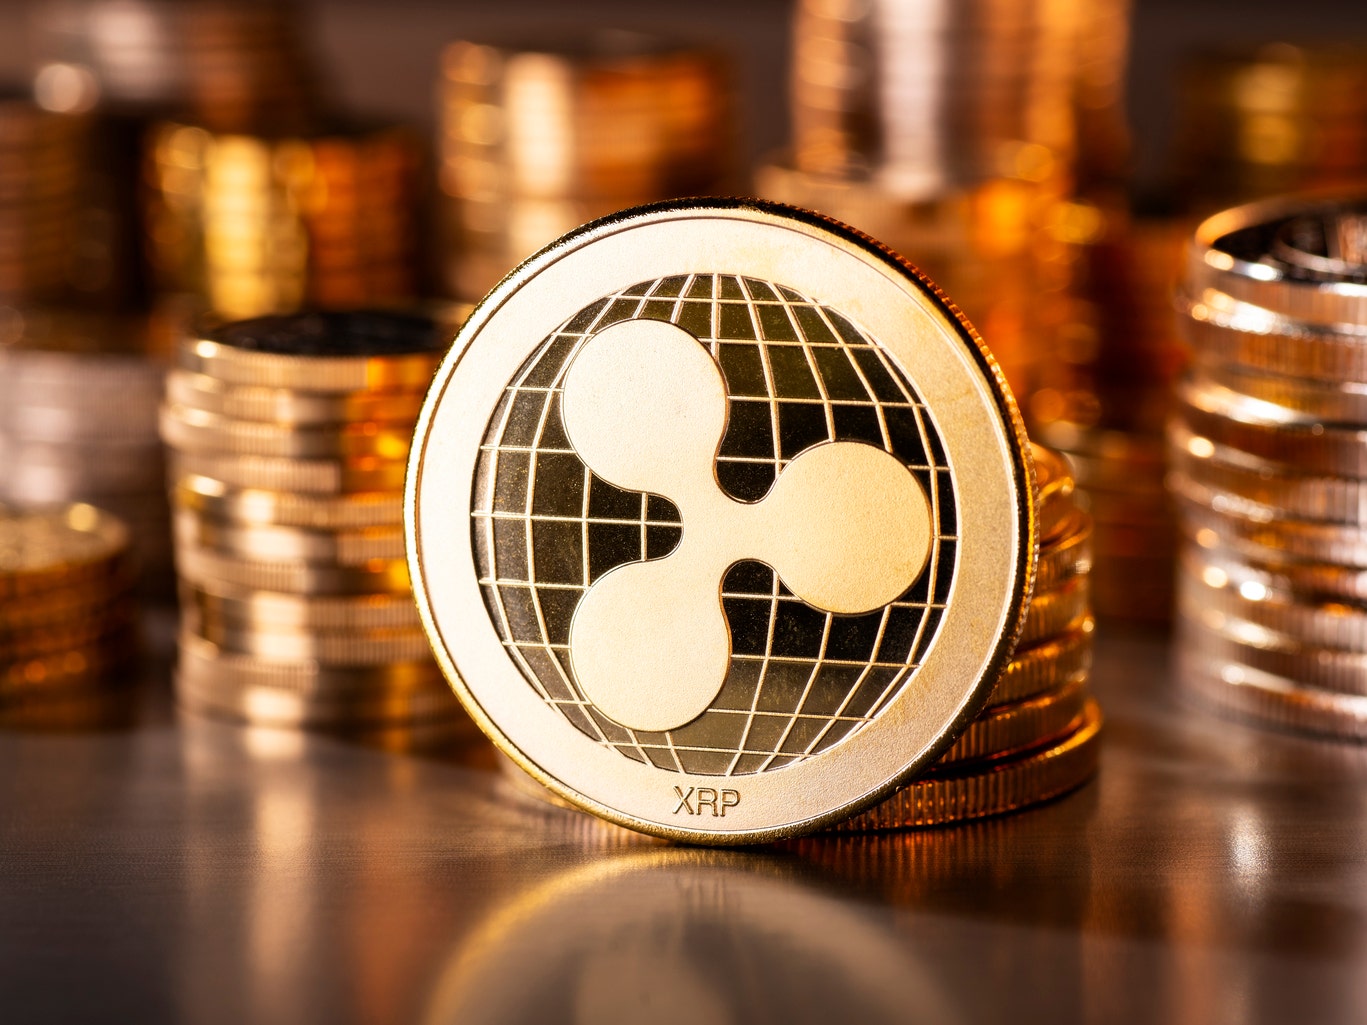 Judge in Ripple cryptocurrency case wants token holders' views